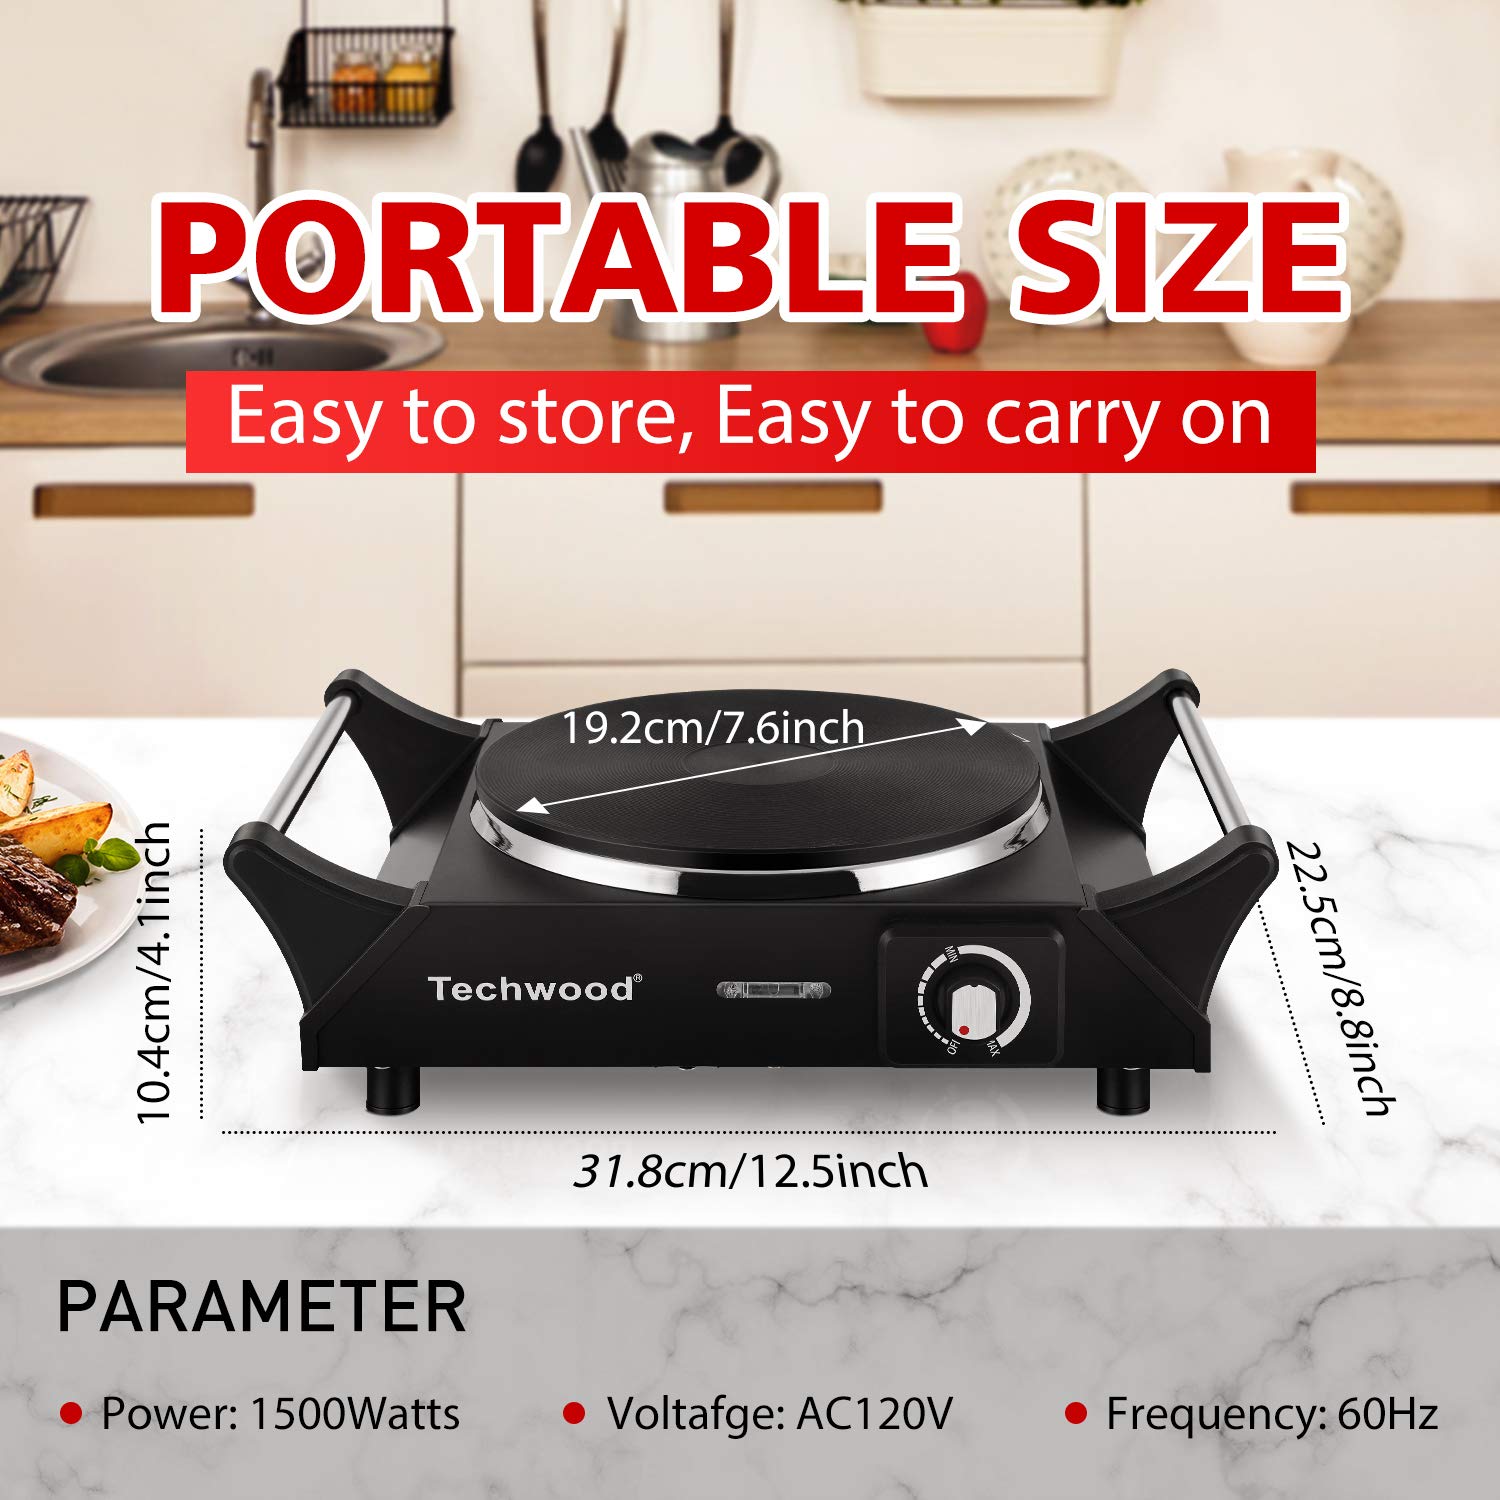 KAERSIDUN T02 Hot Plate Electric Single Burner 1500W Portable Burner for  Cooking with Adjustable Temperature & Stay Cool Handles, Non-Slip Rub